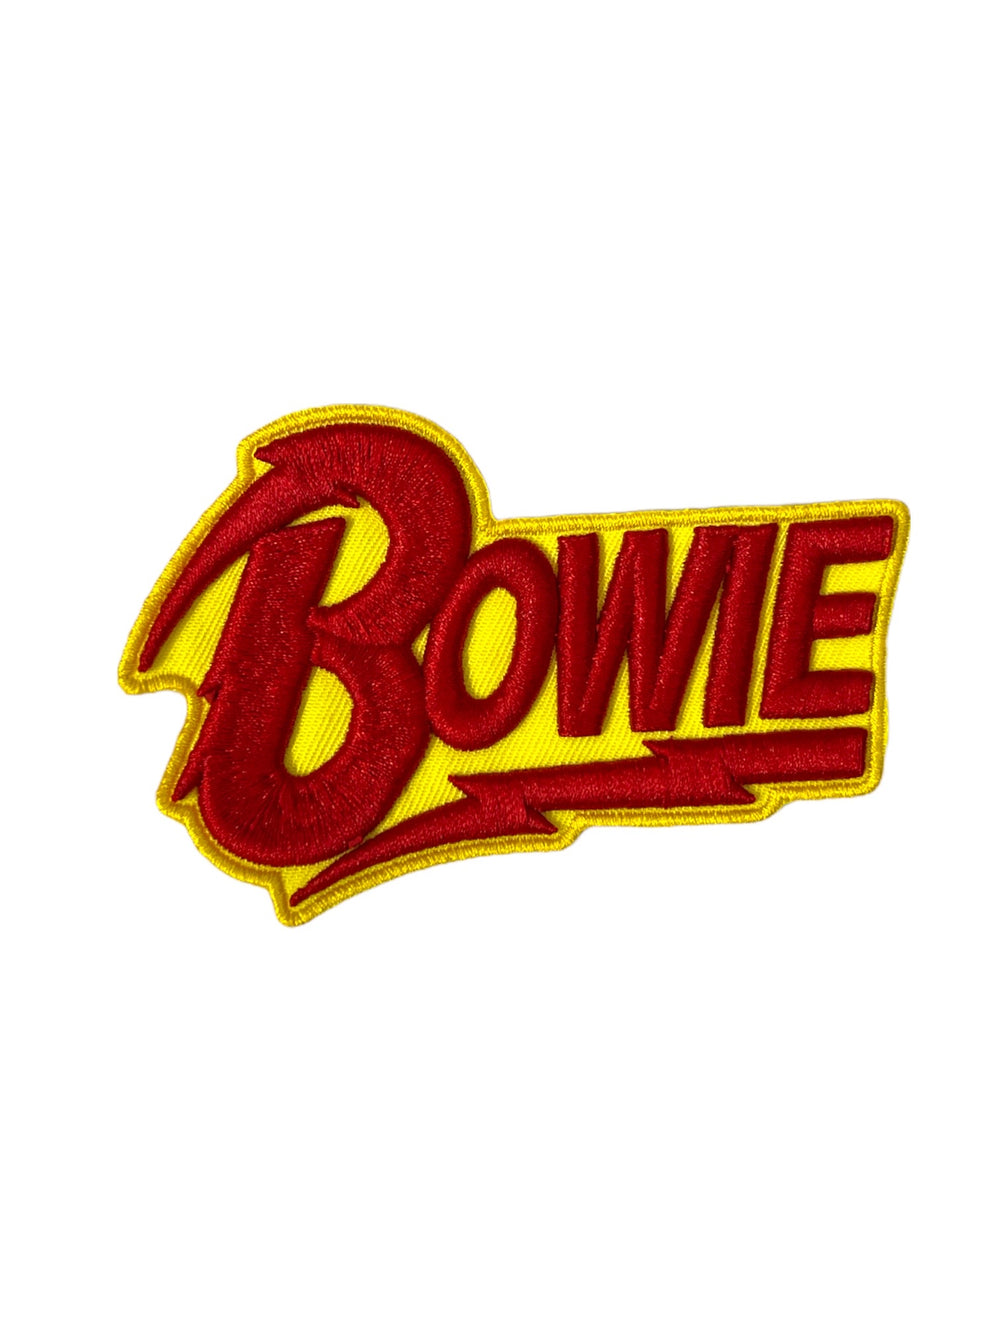 David Bowie Diamond Dogs Logo Official Woven Patch Brand New Official